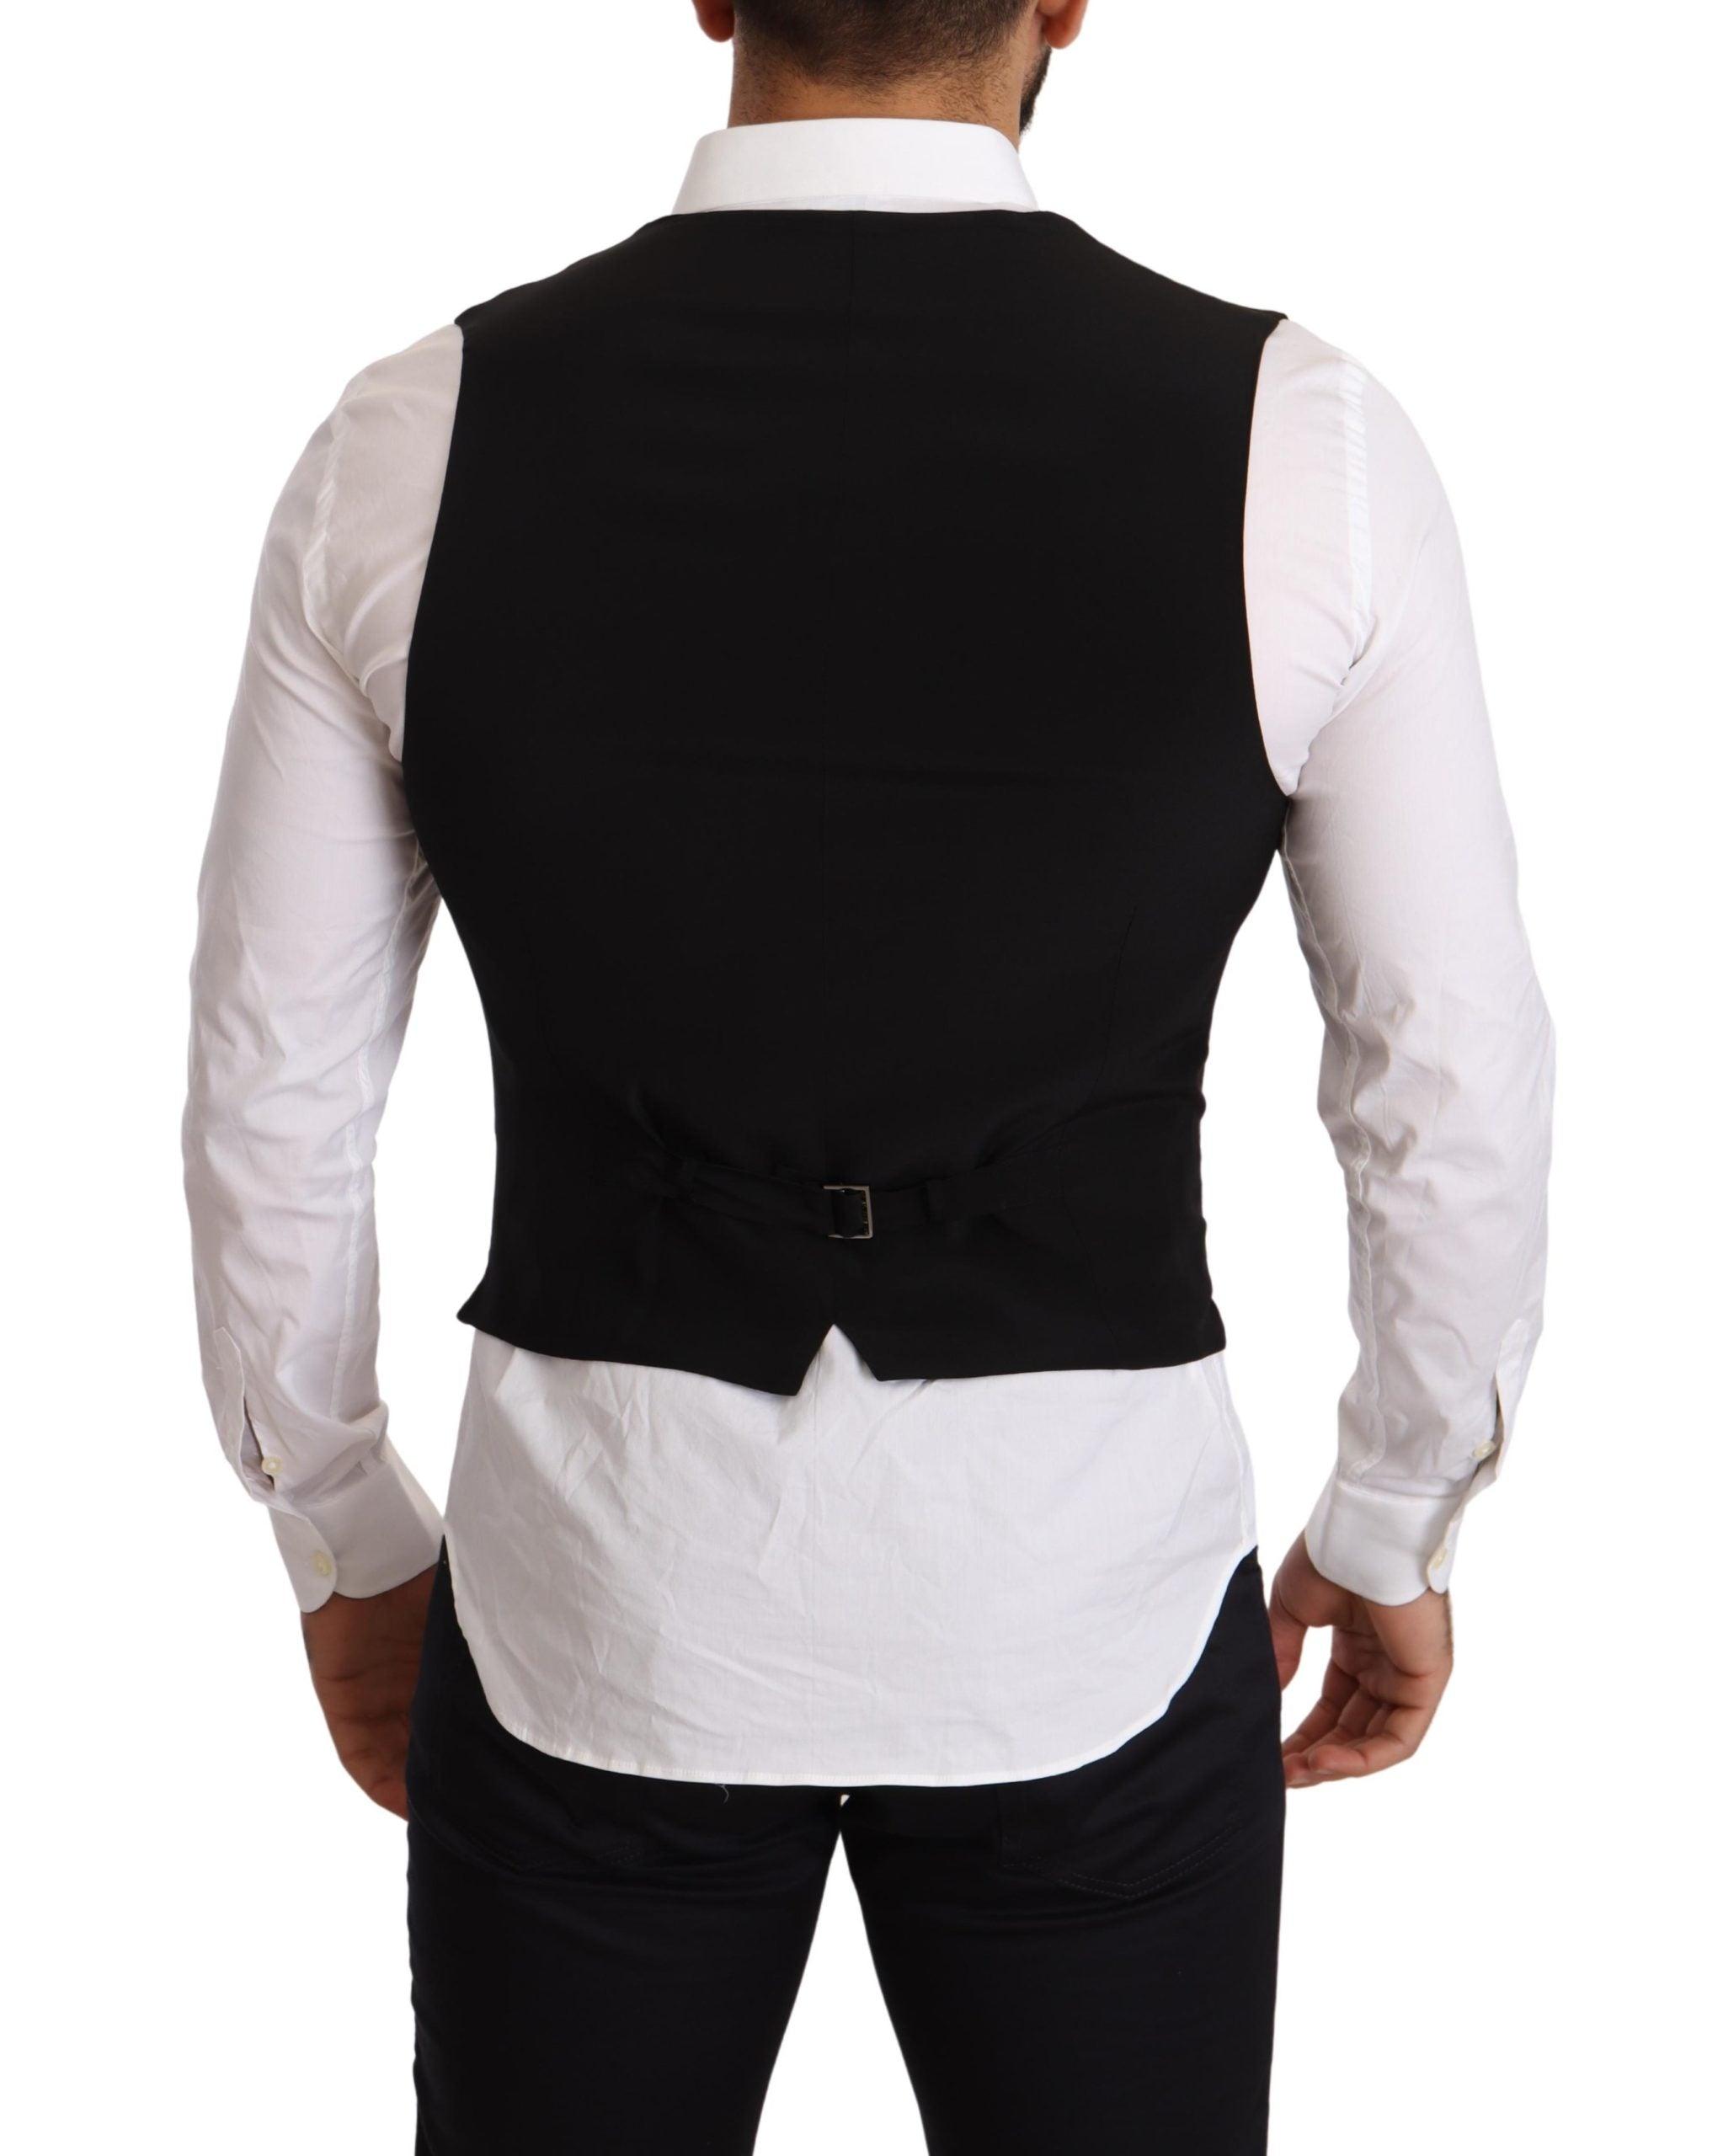 Save 20% Dolce & Gabbana Black Wool Striped Double Breasted Formal Vest for Men Mens Clothing Jackets Waistcoats and gilets 